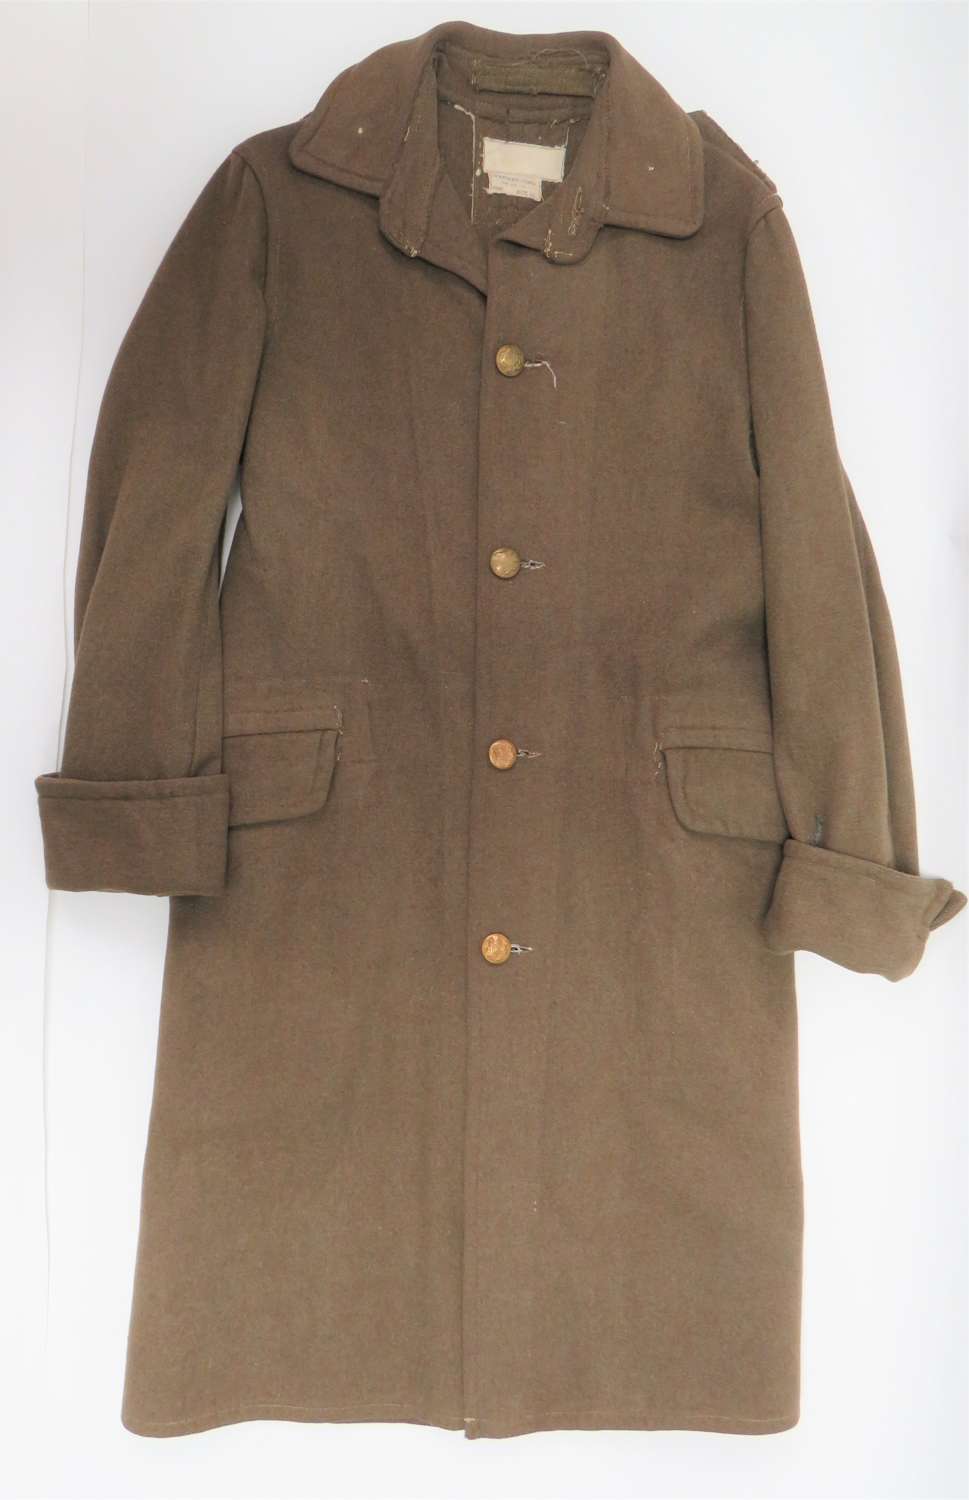 Rare 1940 Dated Battle of France Other Ranks Greatcoat